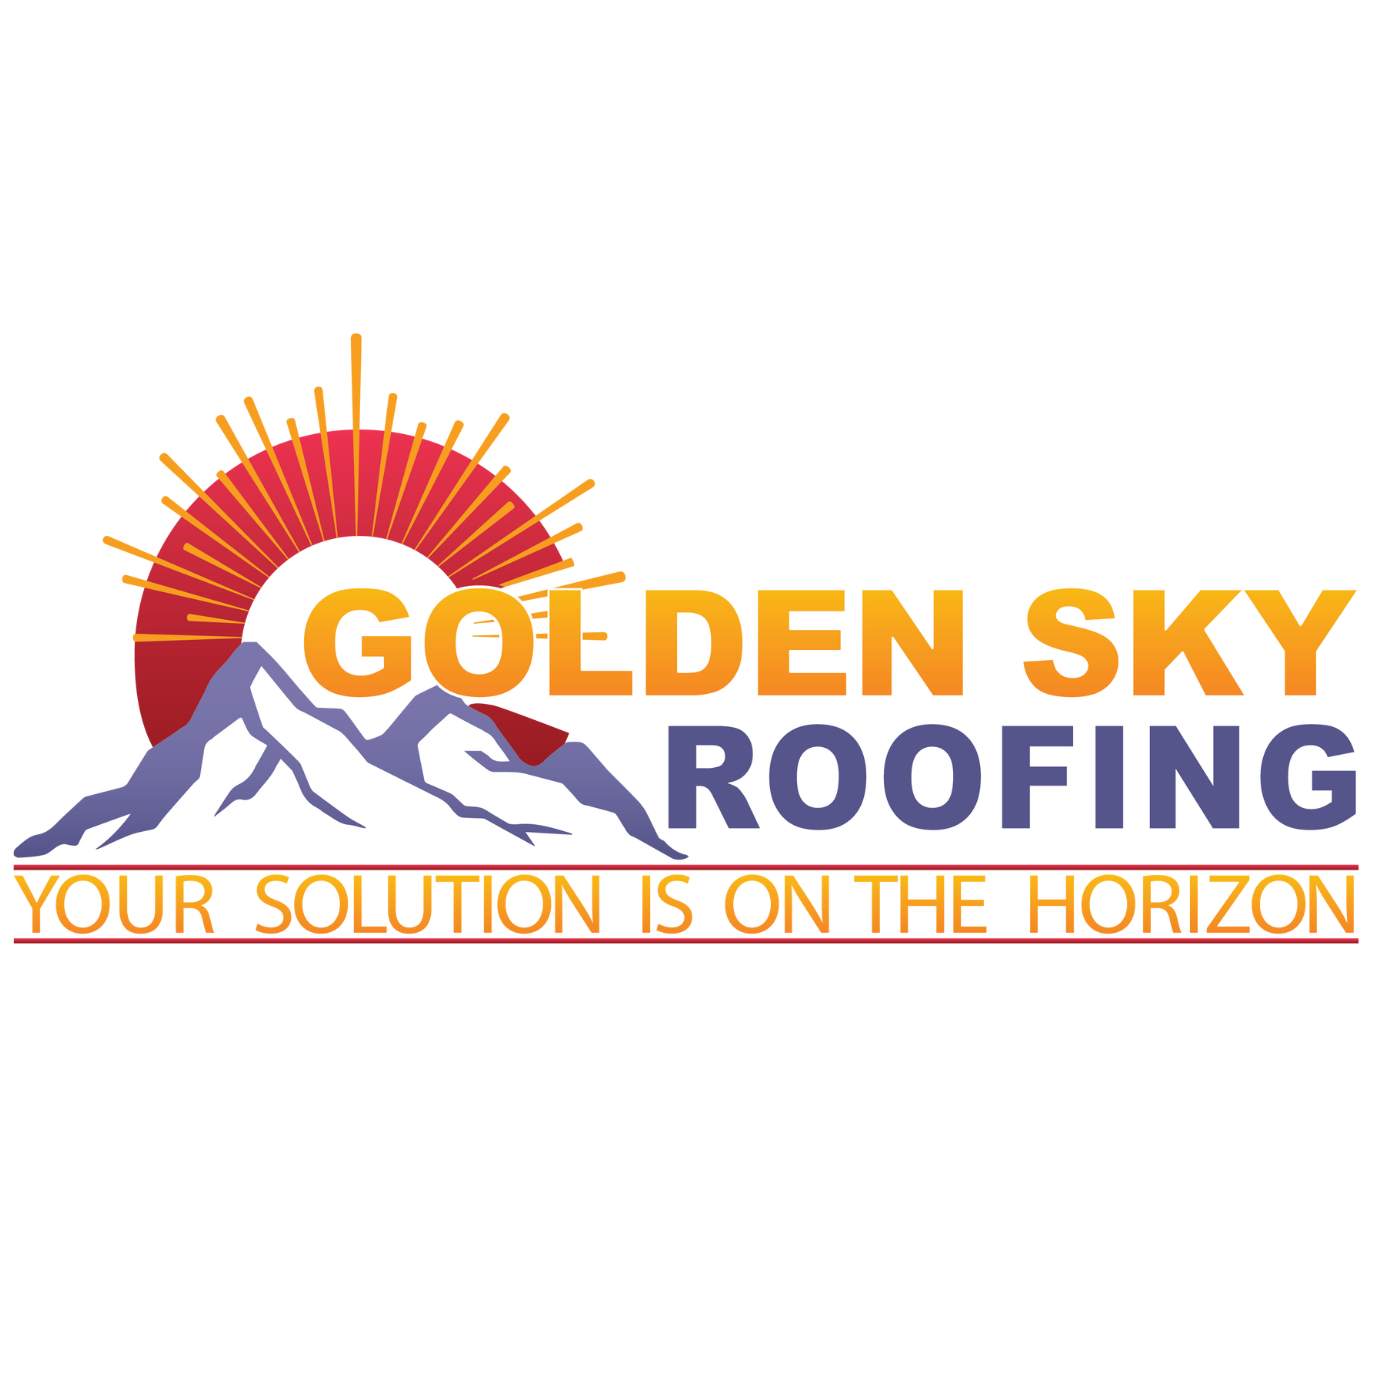 Image of the Golden Sky Roofing logo